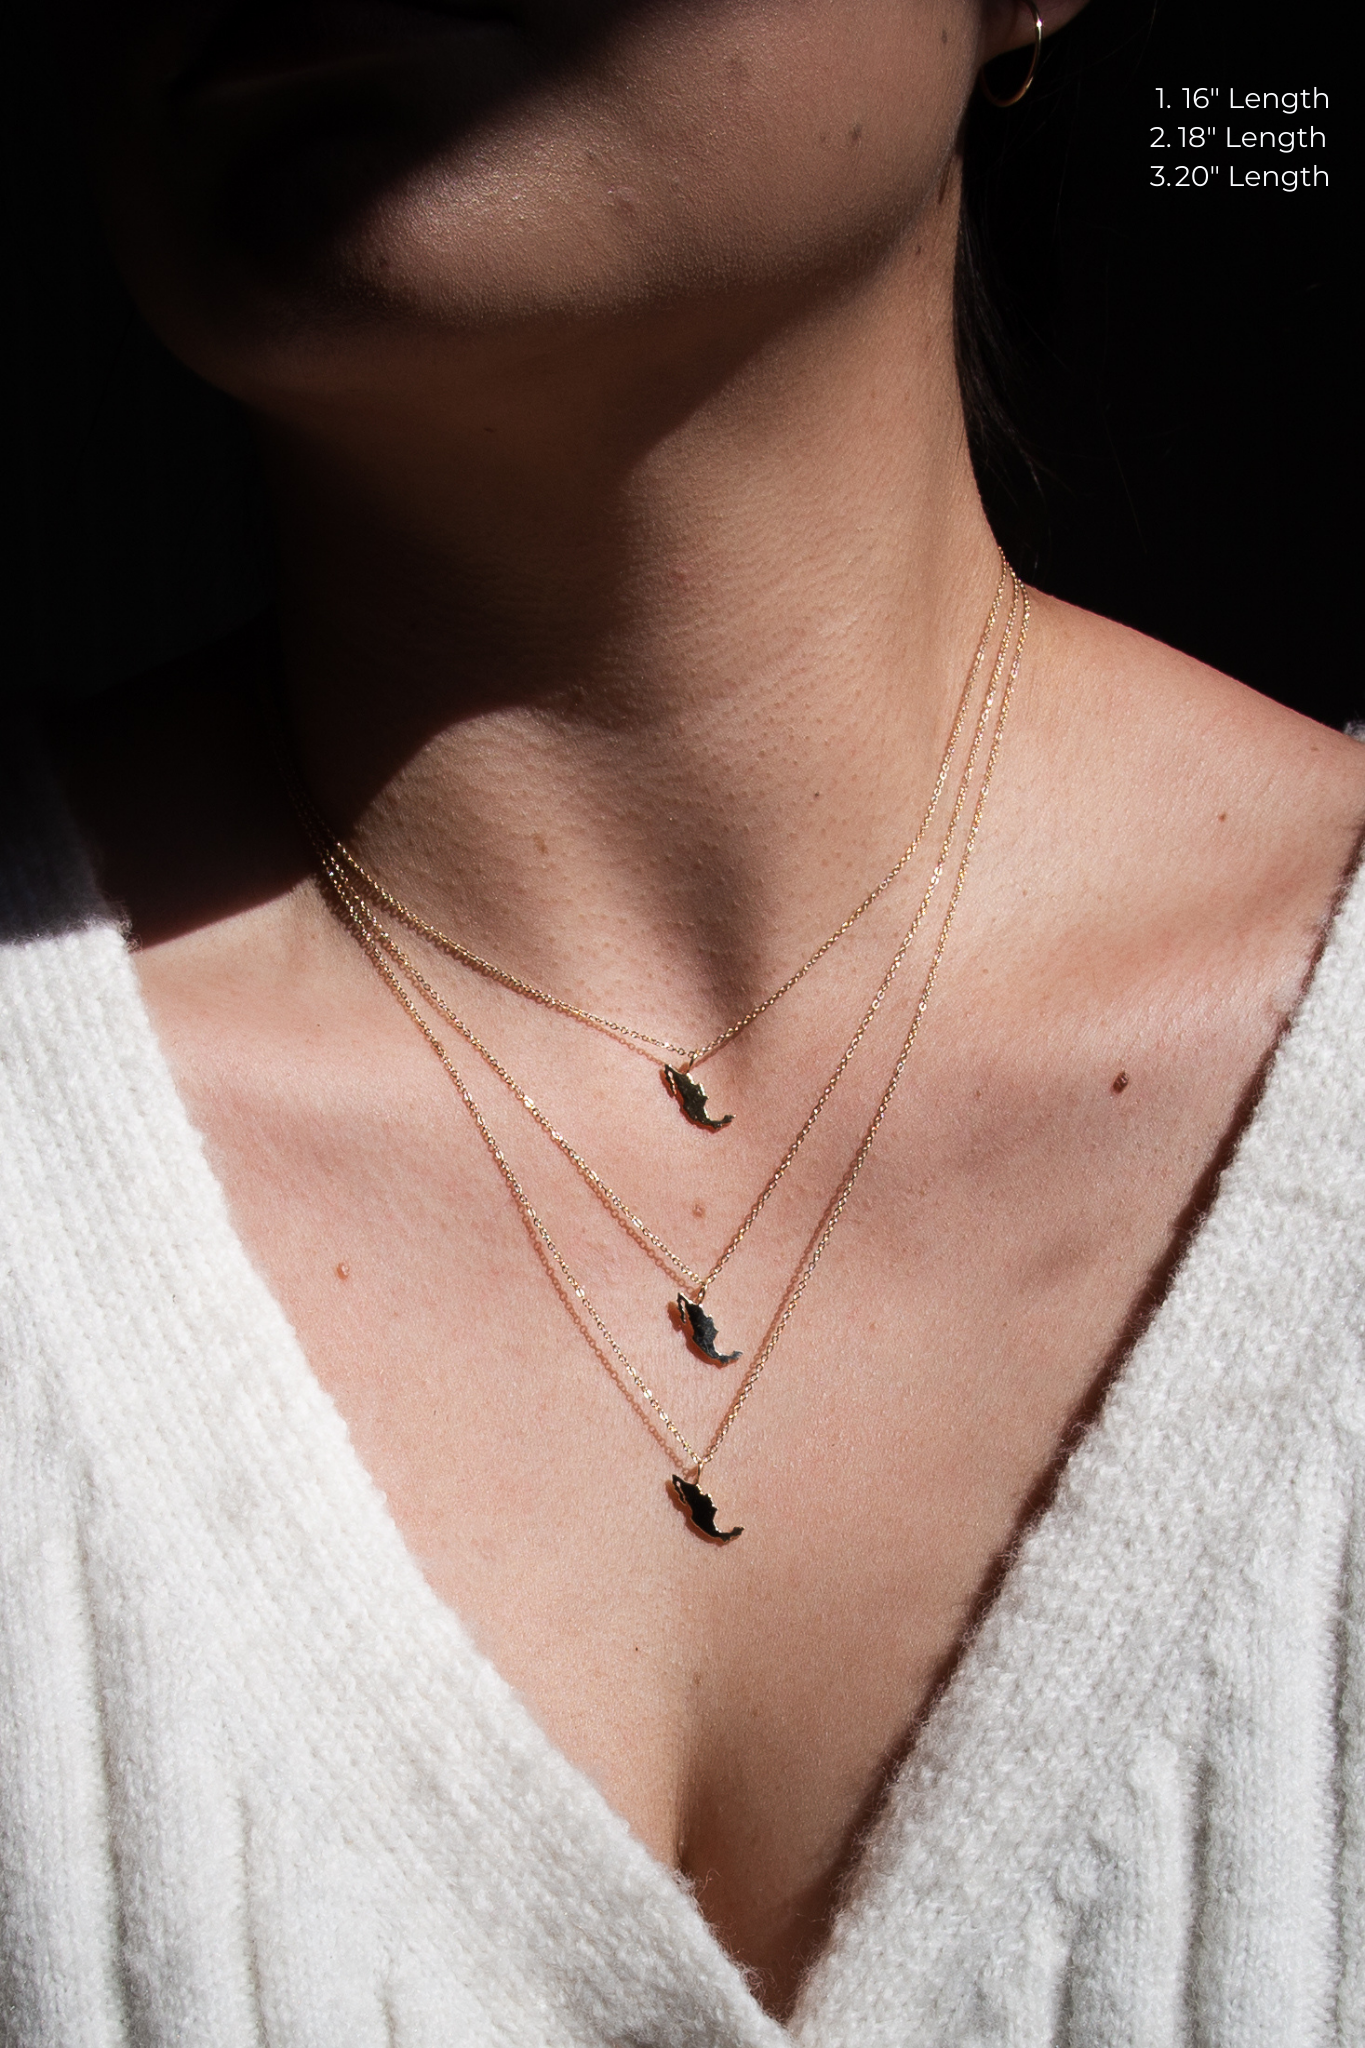 Initial P Necklace Adjustable 41-46cm/16-18' in 18k Gold Vermeil on  Sterling Silver | Jewellery by Monica Vinader